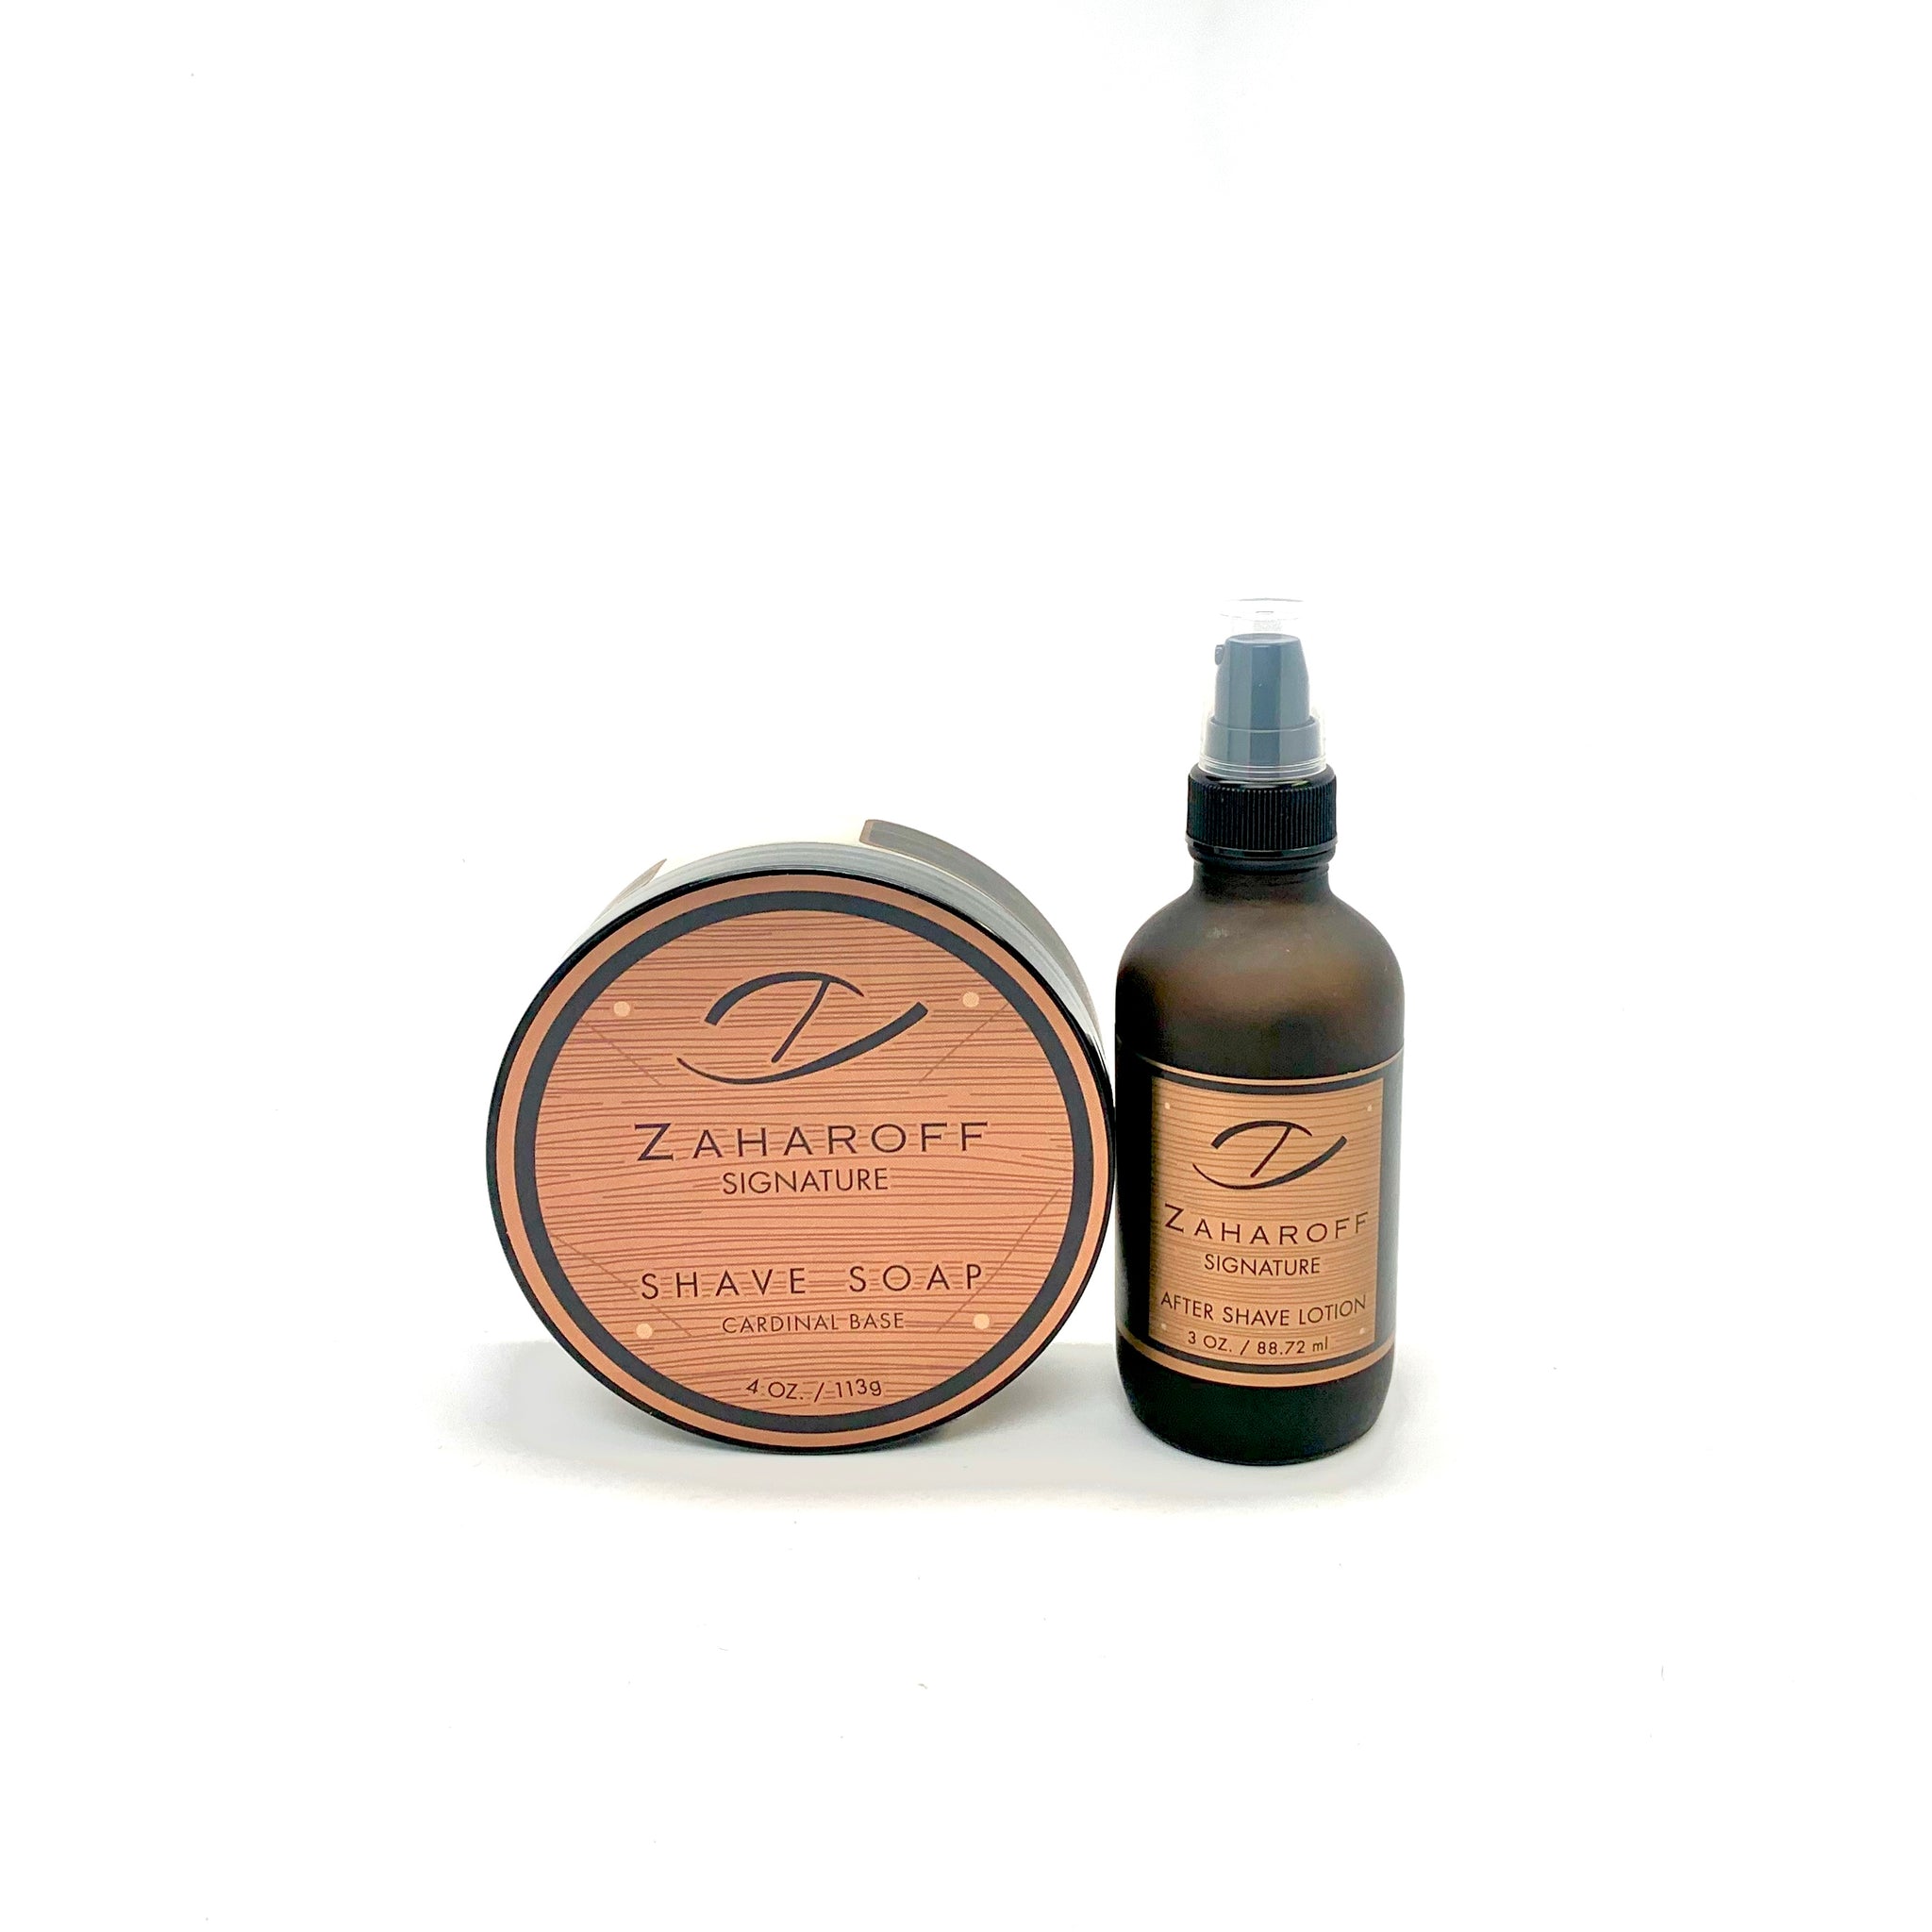 Zaharoff Signature Shave Soap and Aftershave Lotion Set